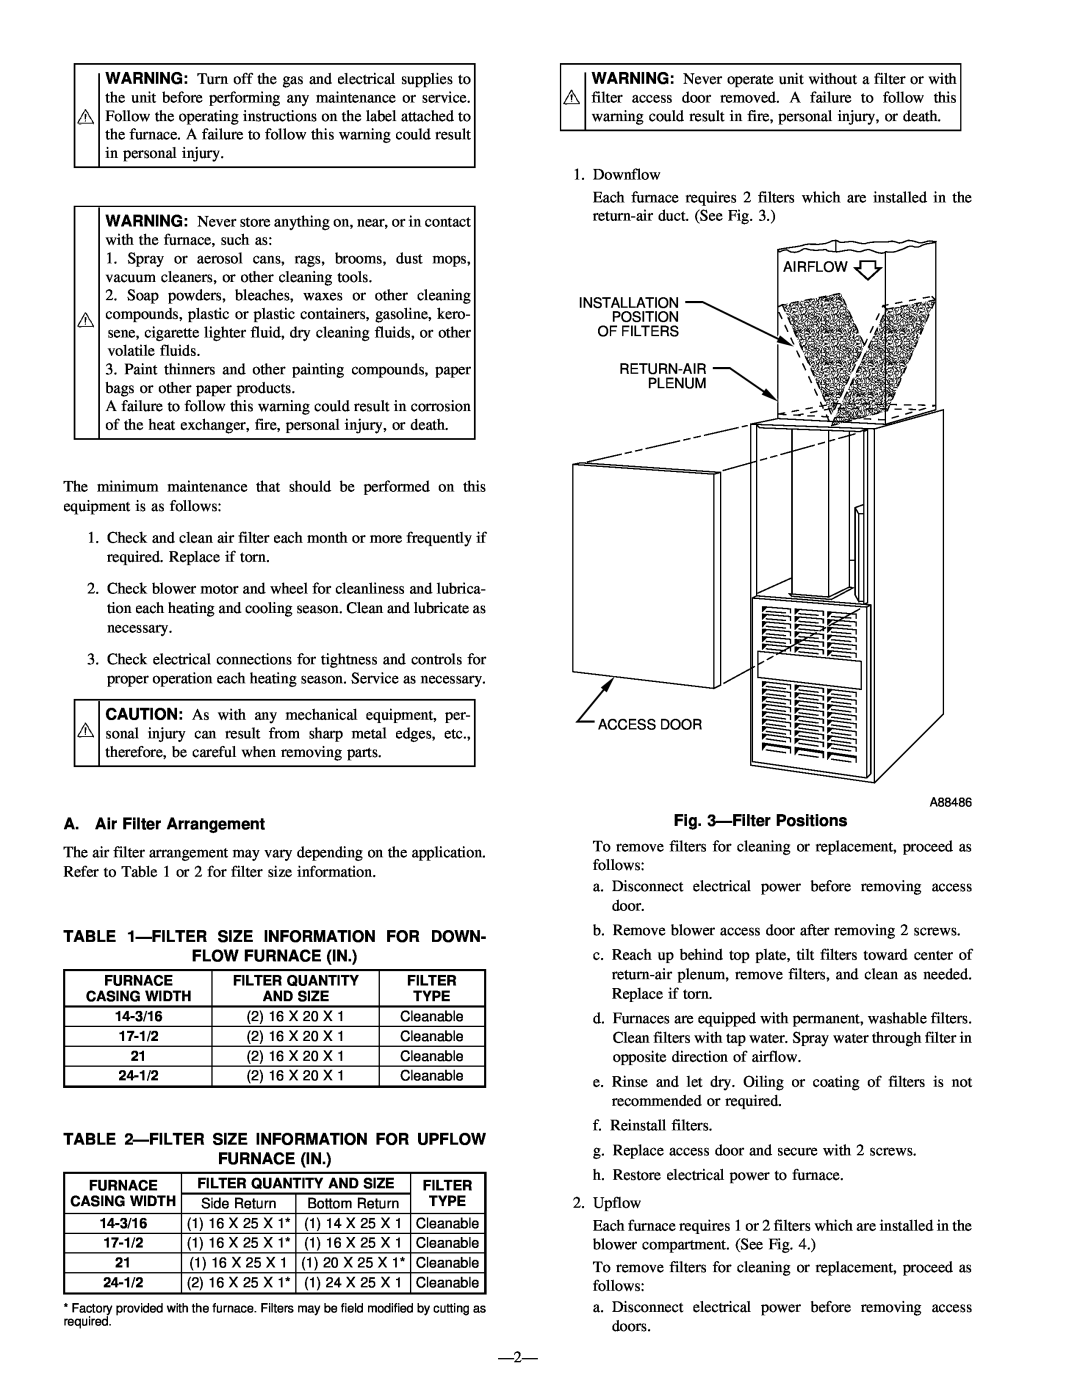 Bryant 394HAD, 396HAD A. Air Filter Arrangement, Ðfilter Size Information For Down, Flow Furnace In, ÐFilter Positions 